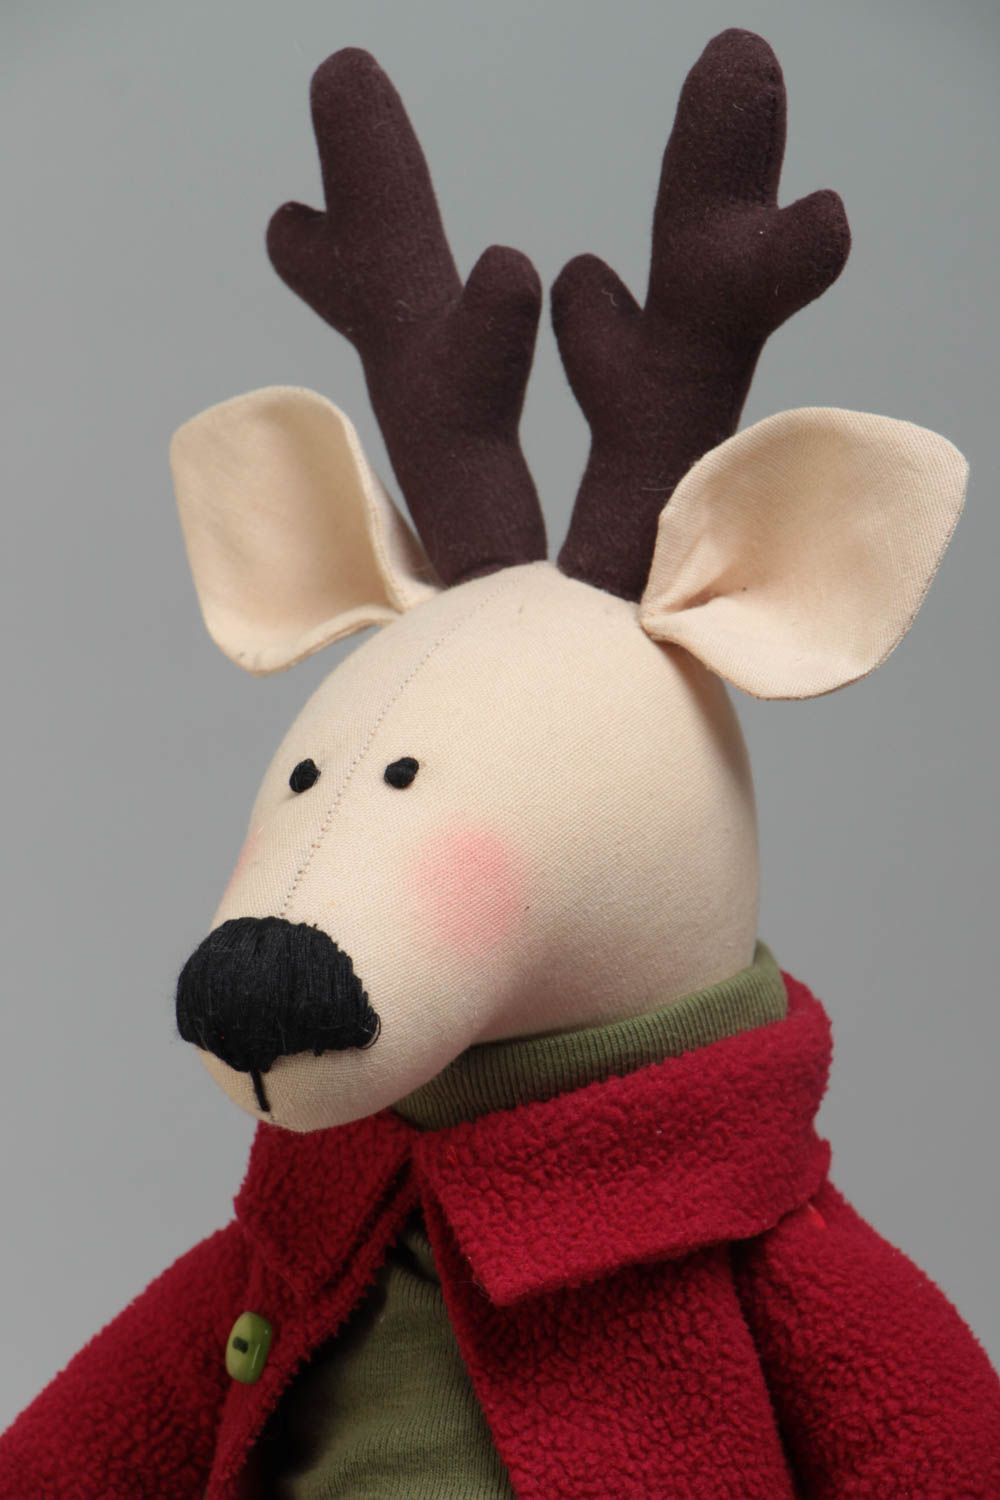 Handmade designer fabric soft toy Deer in red jacket for kids and interior decor photo 3